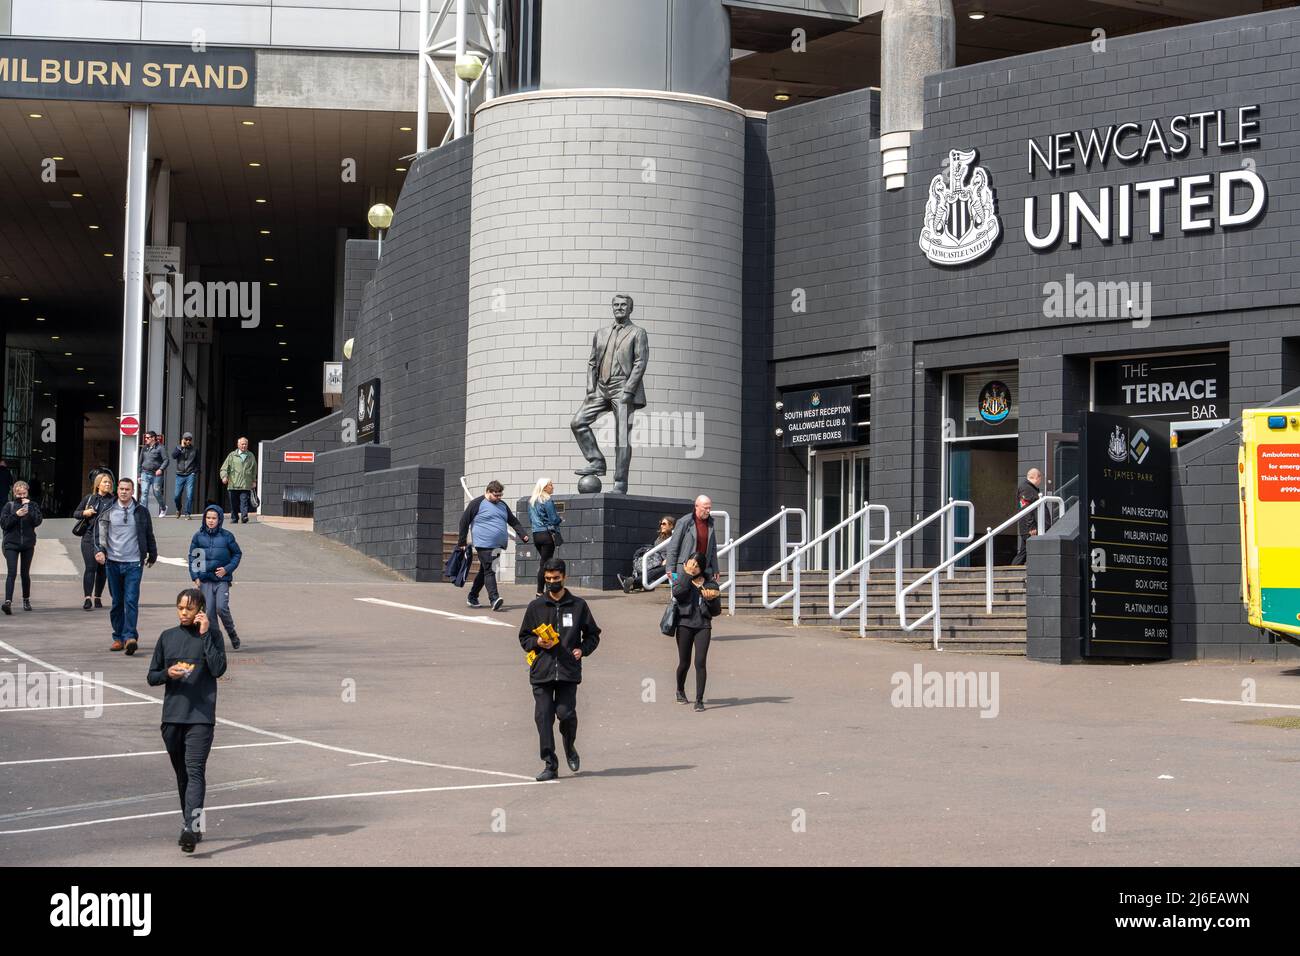 The main entrance to St James' Park, home of Newcastle United football club in Newcastle upon Tyne, UK. Stock Photo